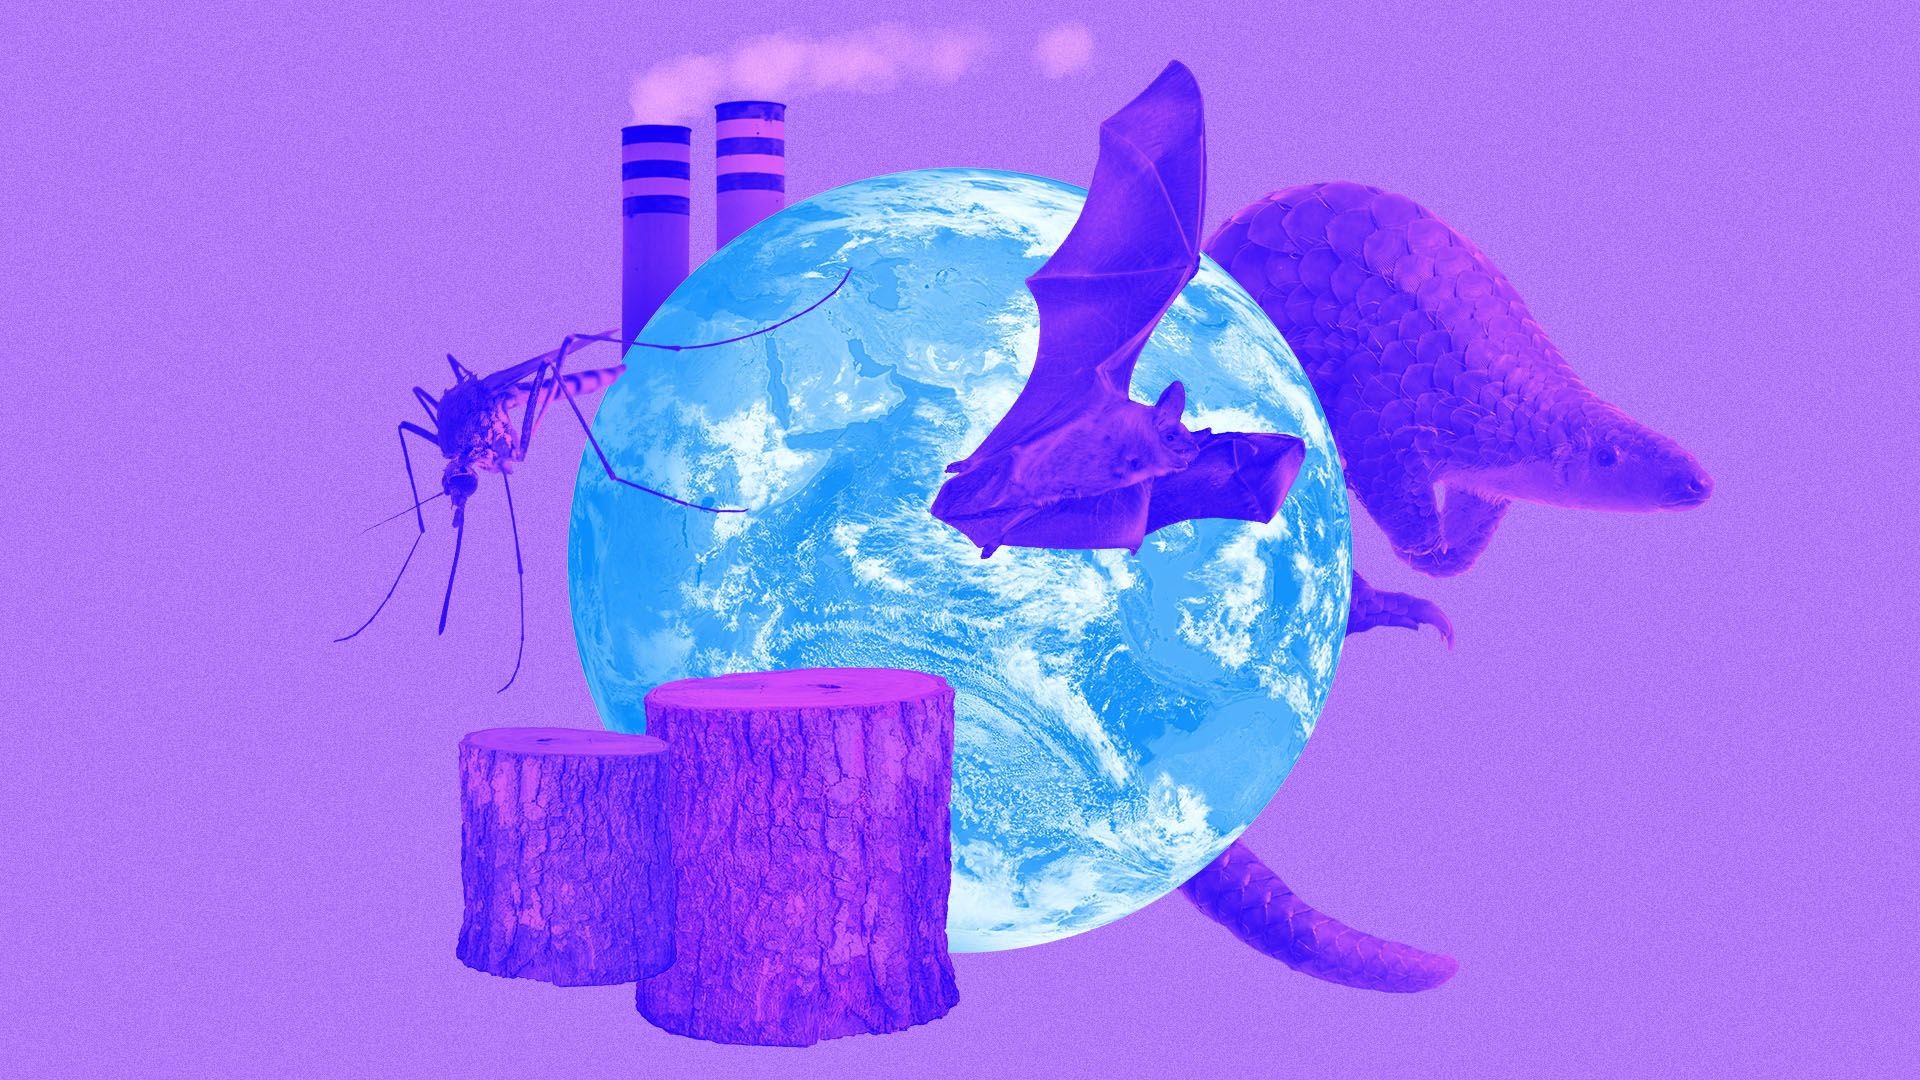 Illustrated collage of the earth surrounded by smoke stacks, a bat, a mosquito, a pangolin, and tree stumps.